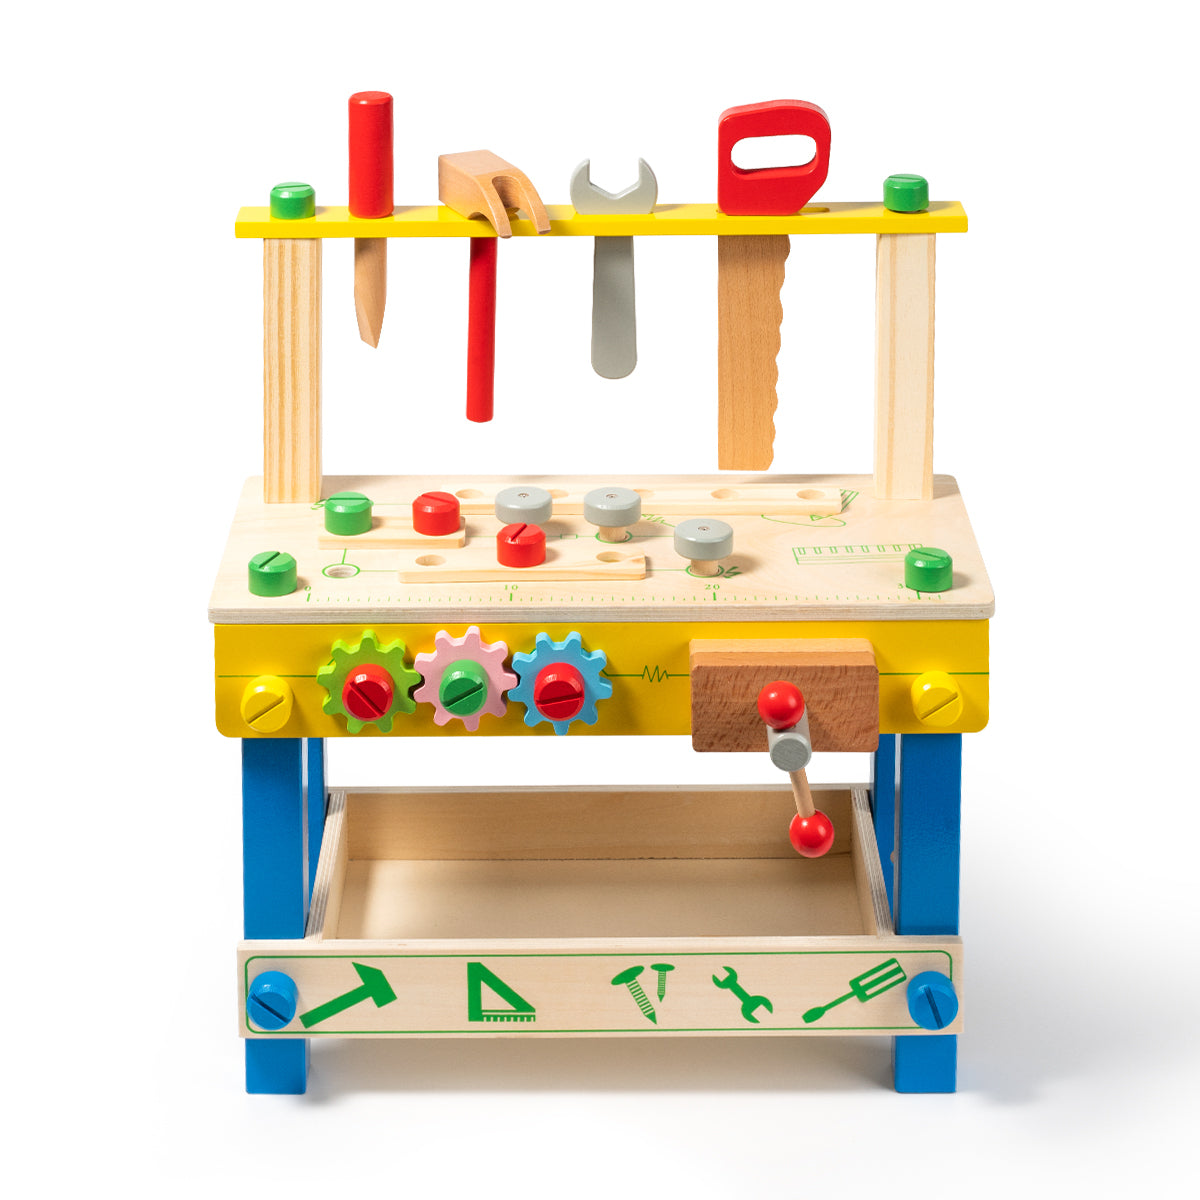 Wooden Tool Workbench Toy for Kids blue-solid wood